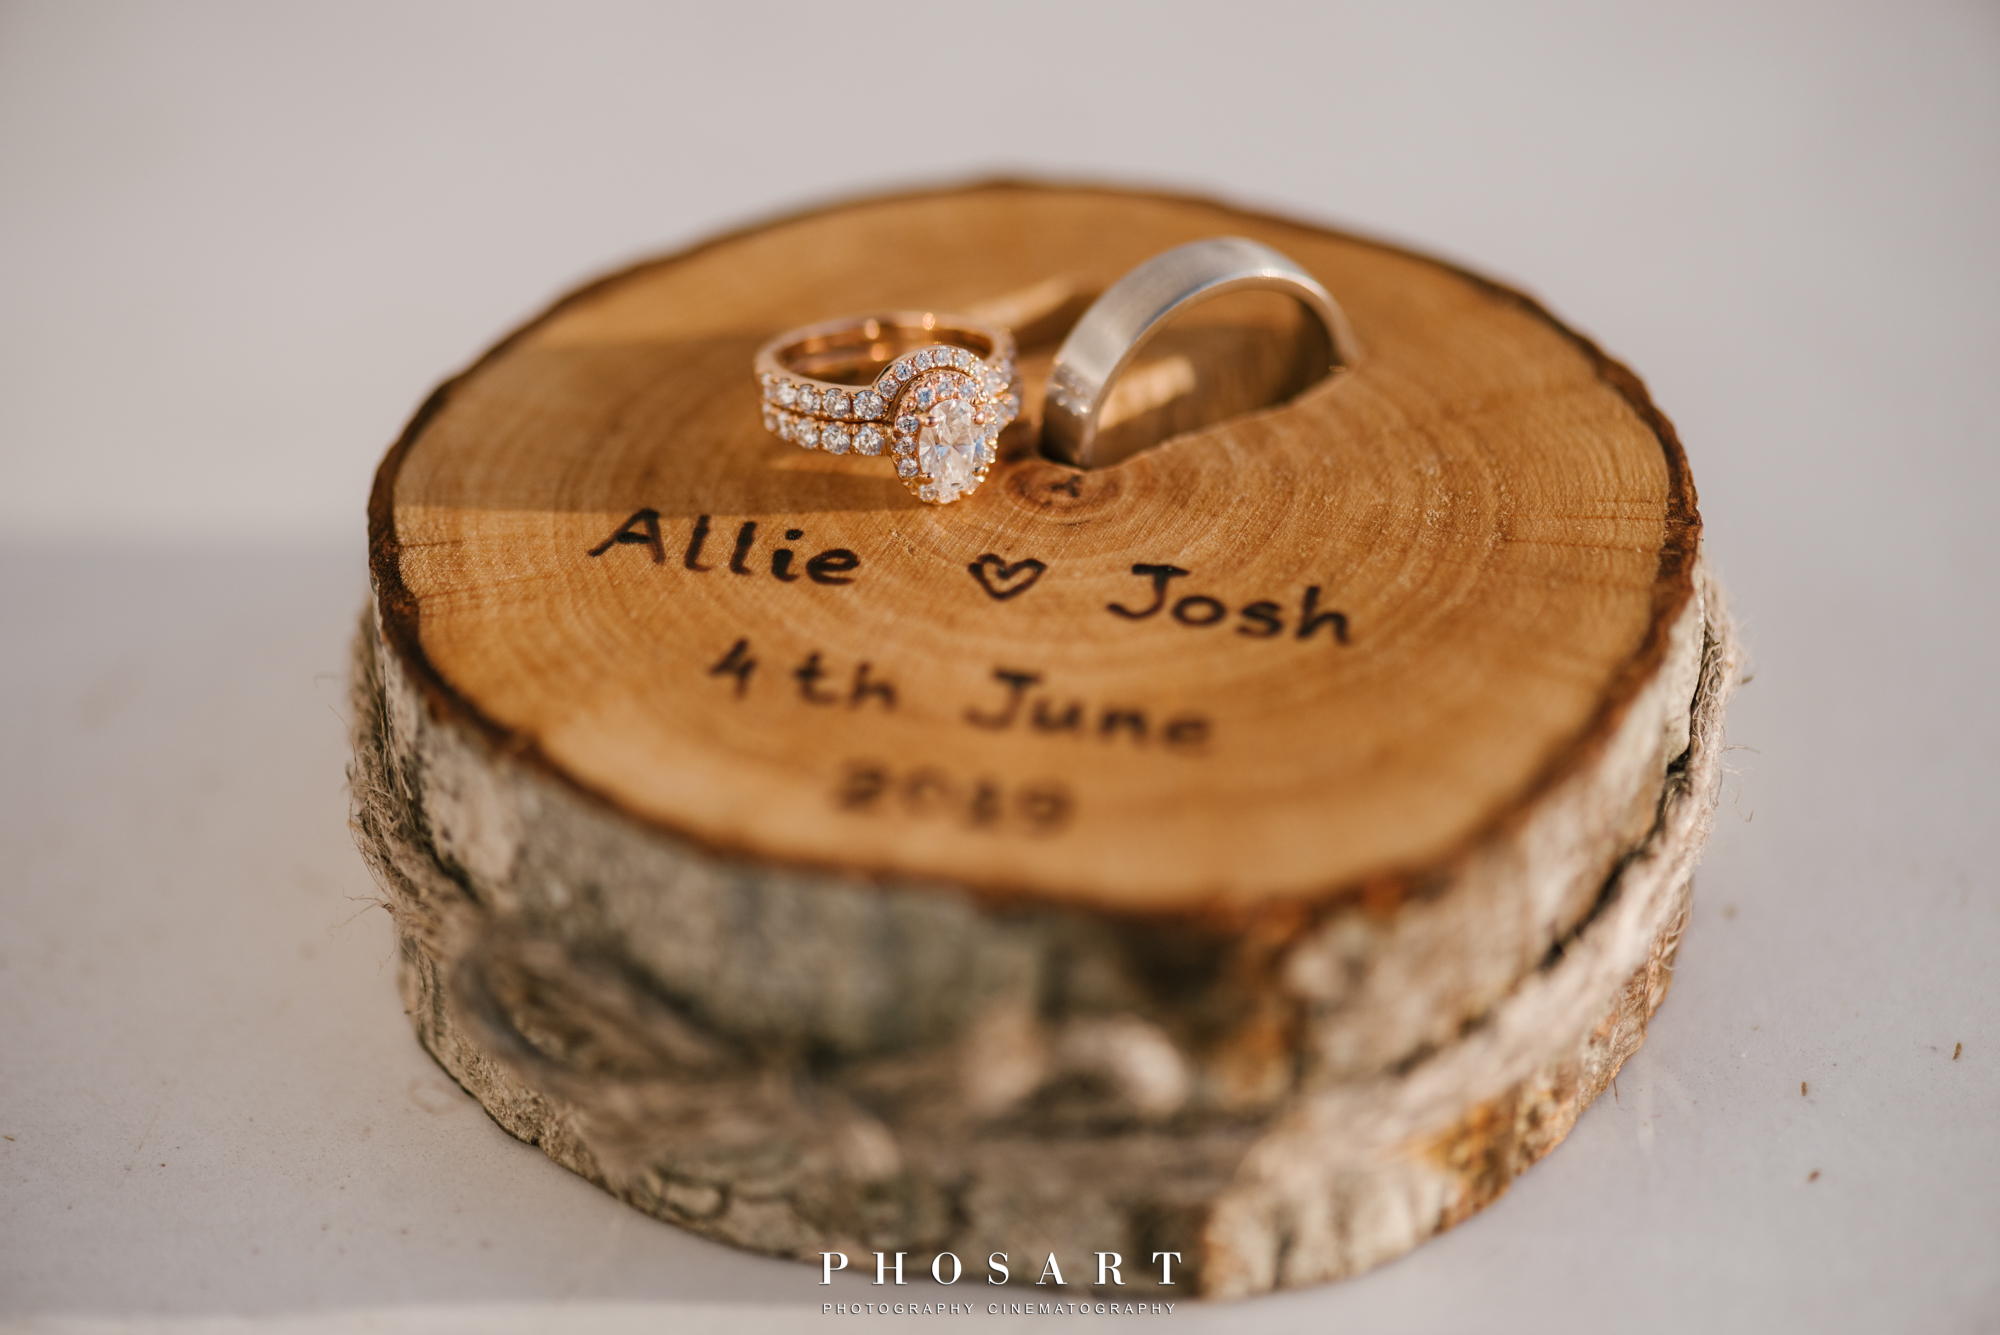 A small cylindrical piece of wood with a diamond ring and a wedding ring on